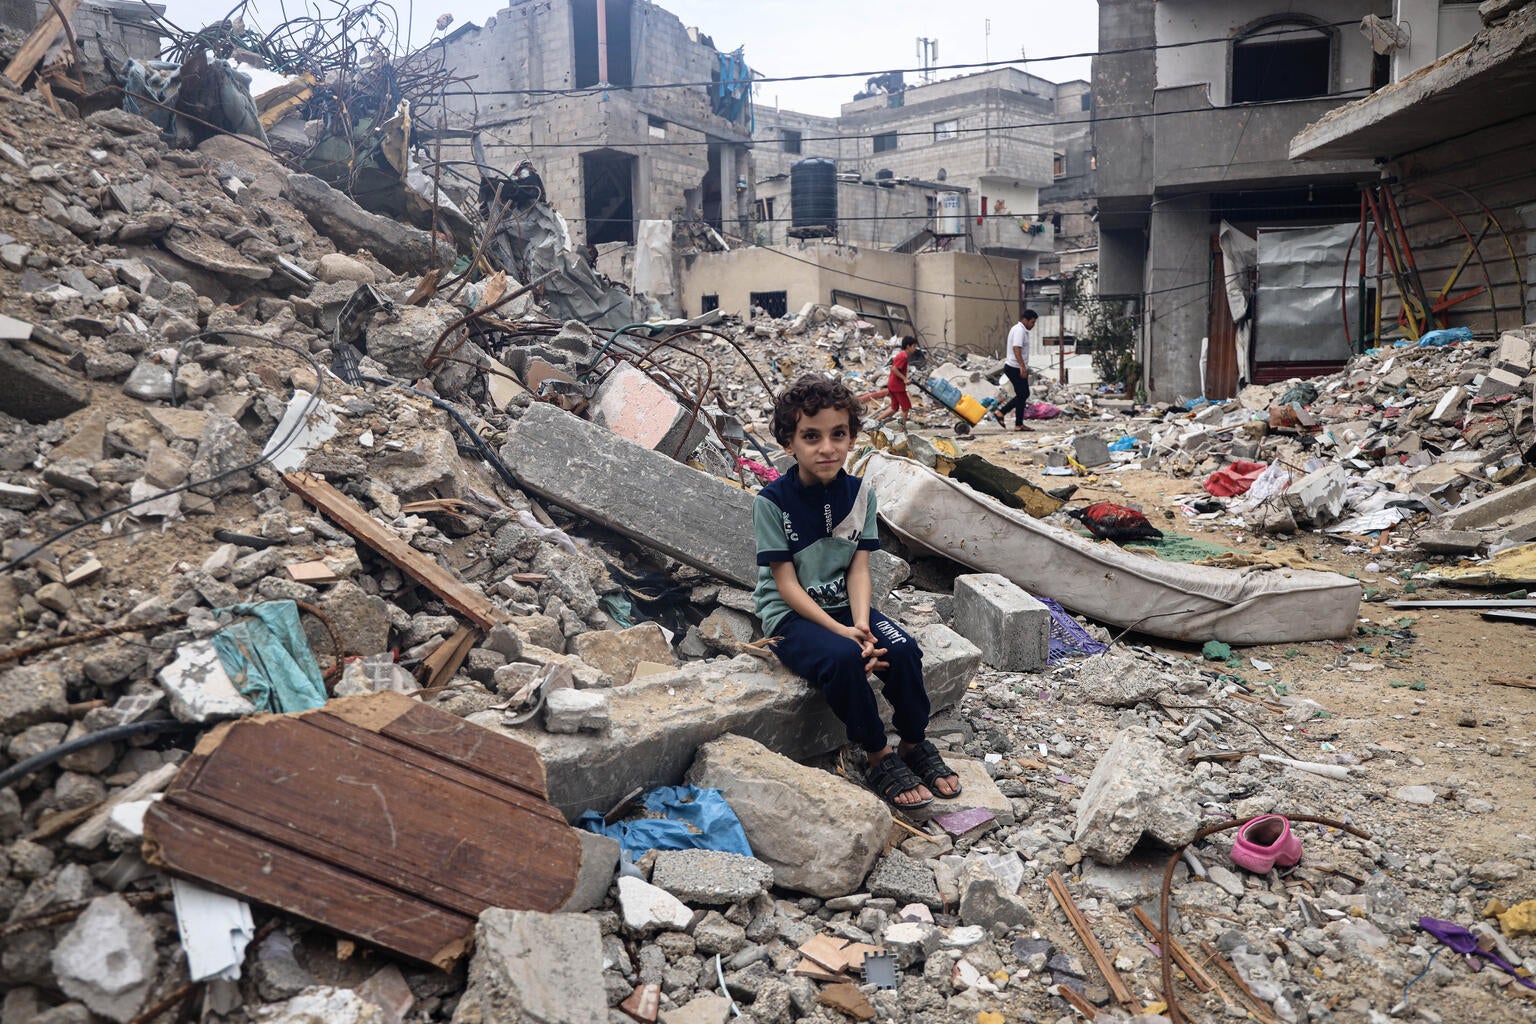 Hear from three UNICEF voices on the ground in Gaza